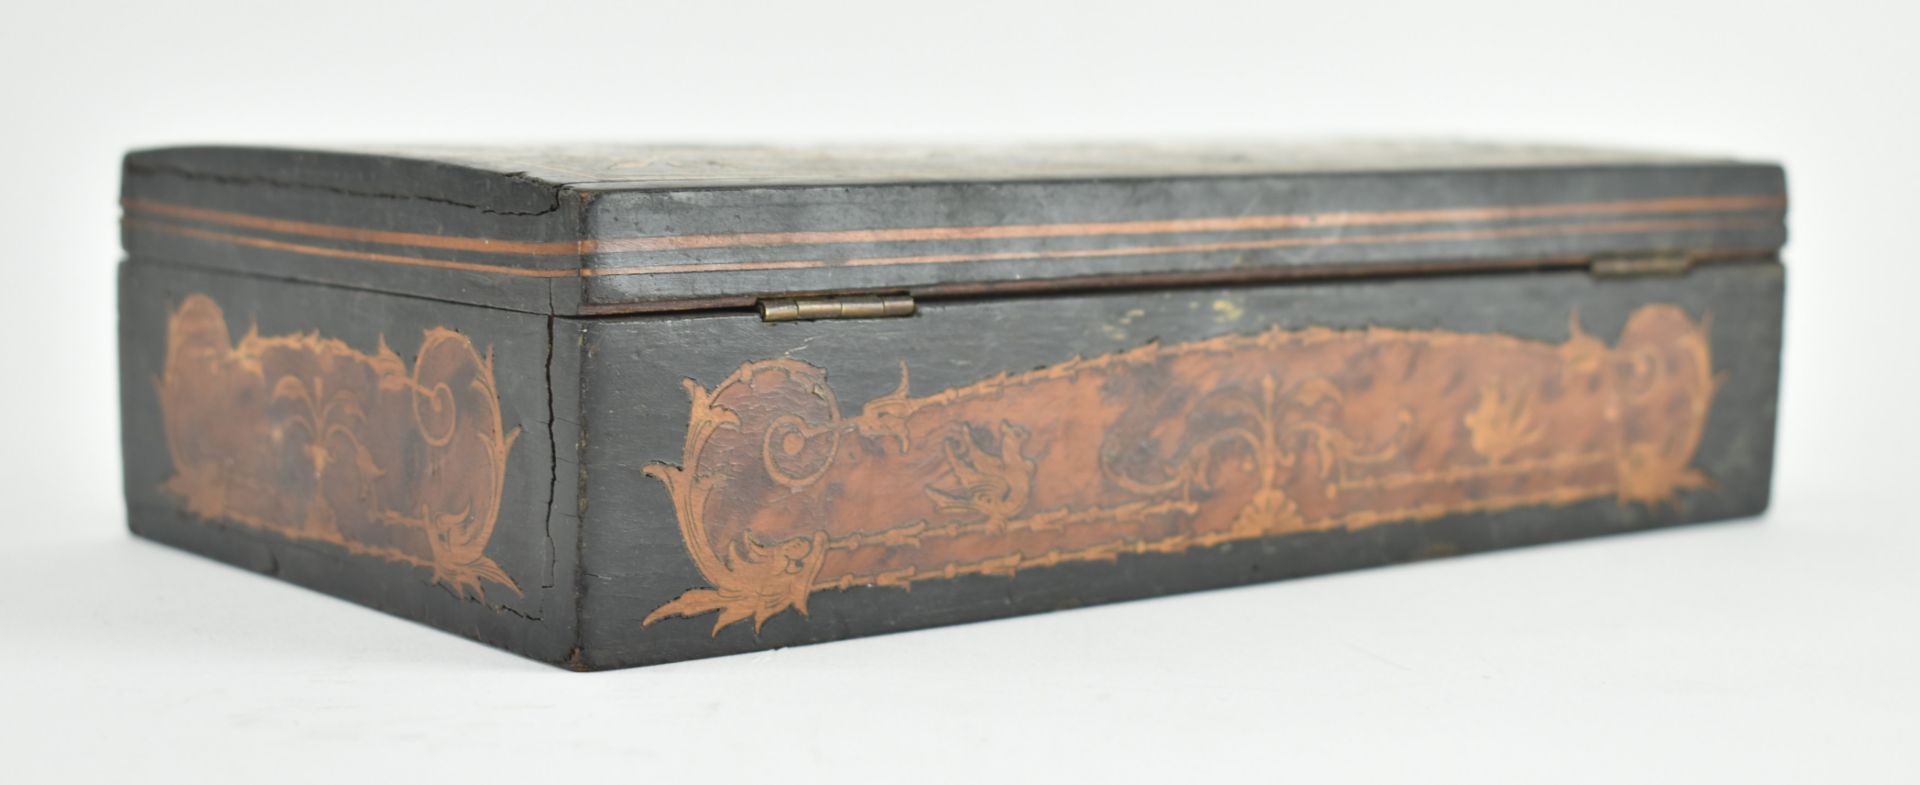 20TH CENTURY EUROPEAN MARQUETRY INLAID WOODEN JEWELRY BOX - Image 5 of 7